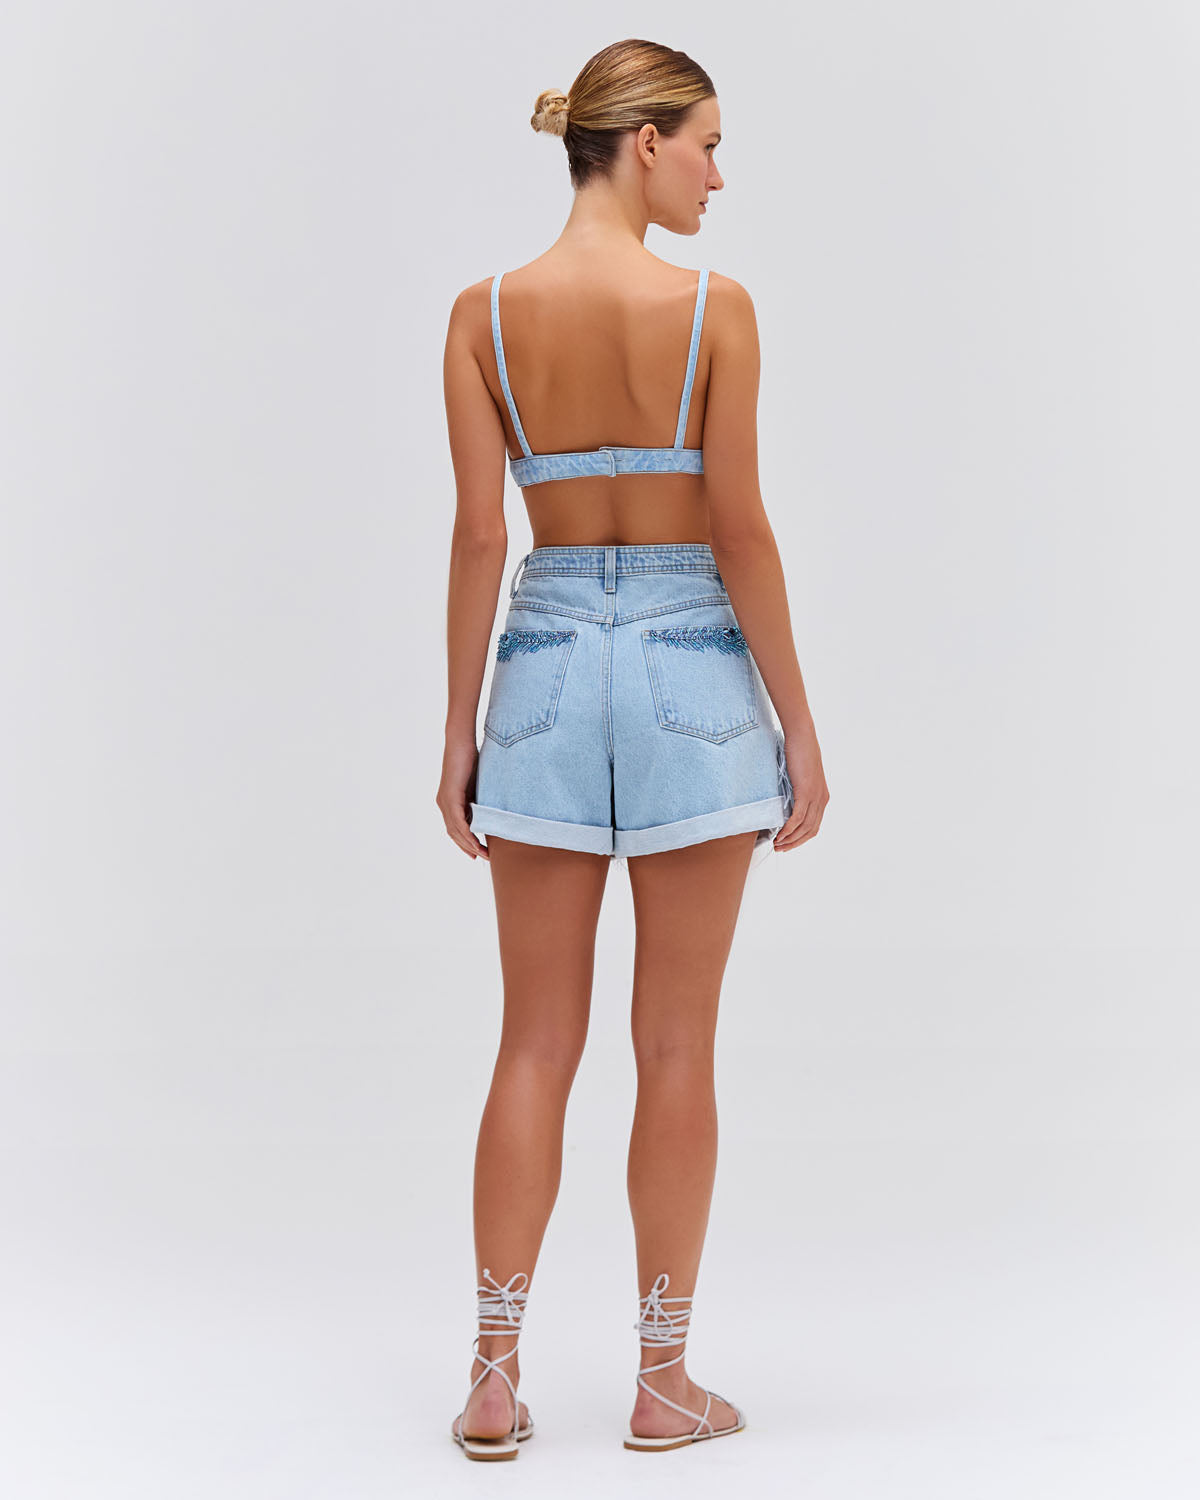 Beaded Feather Denim Shorts (EXCLUSIVE)